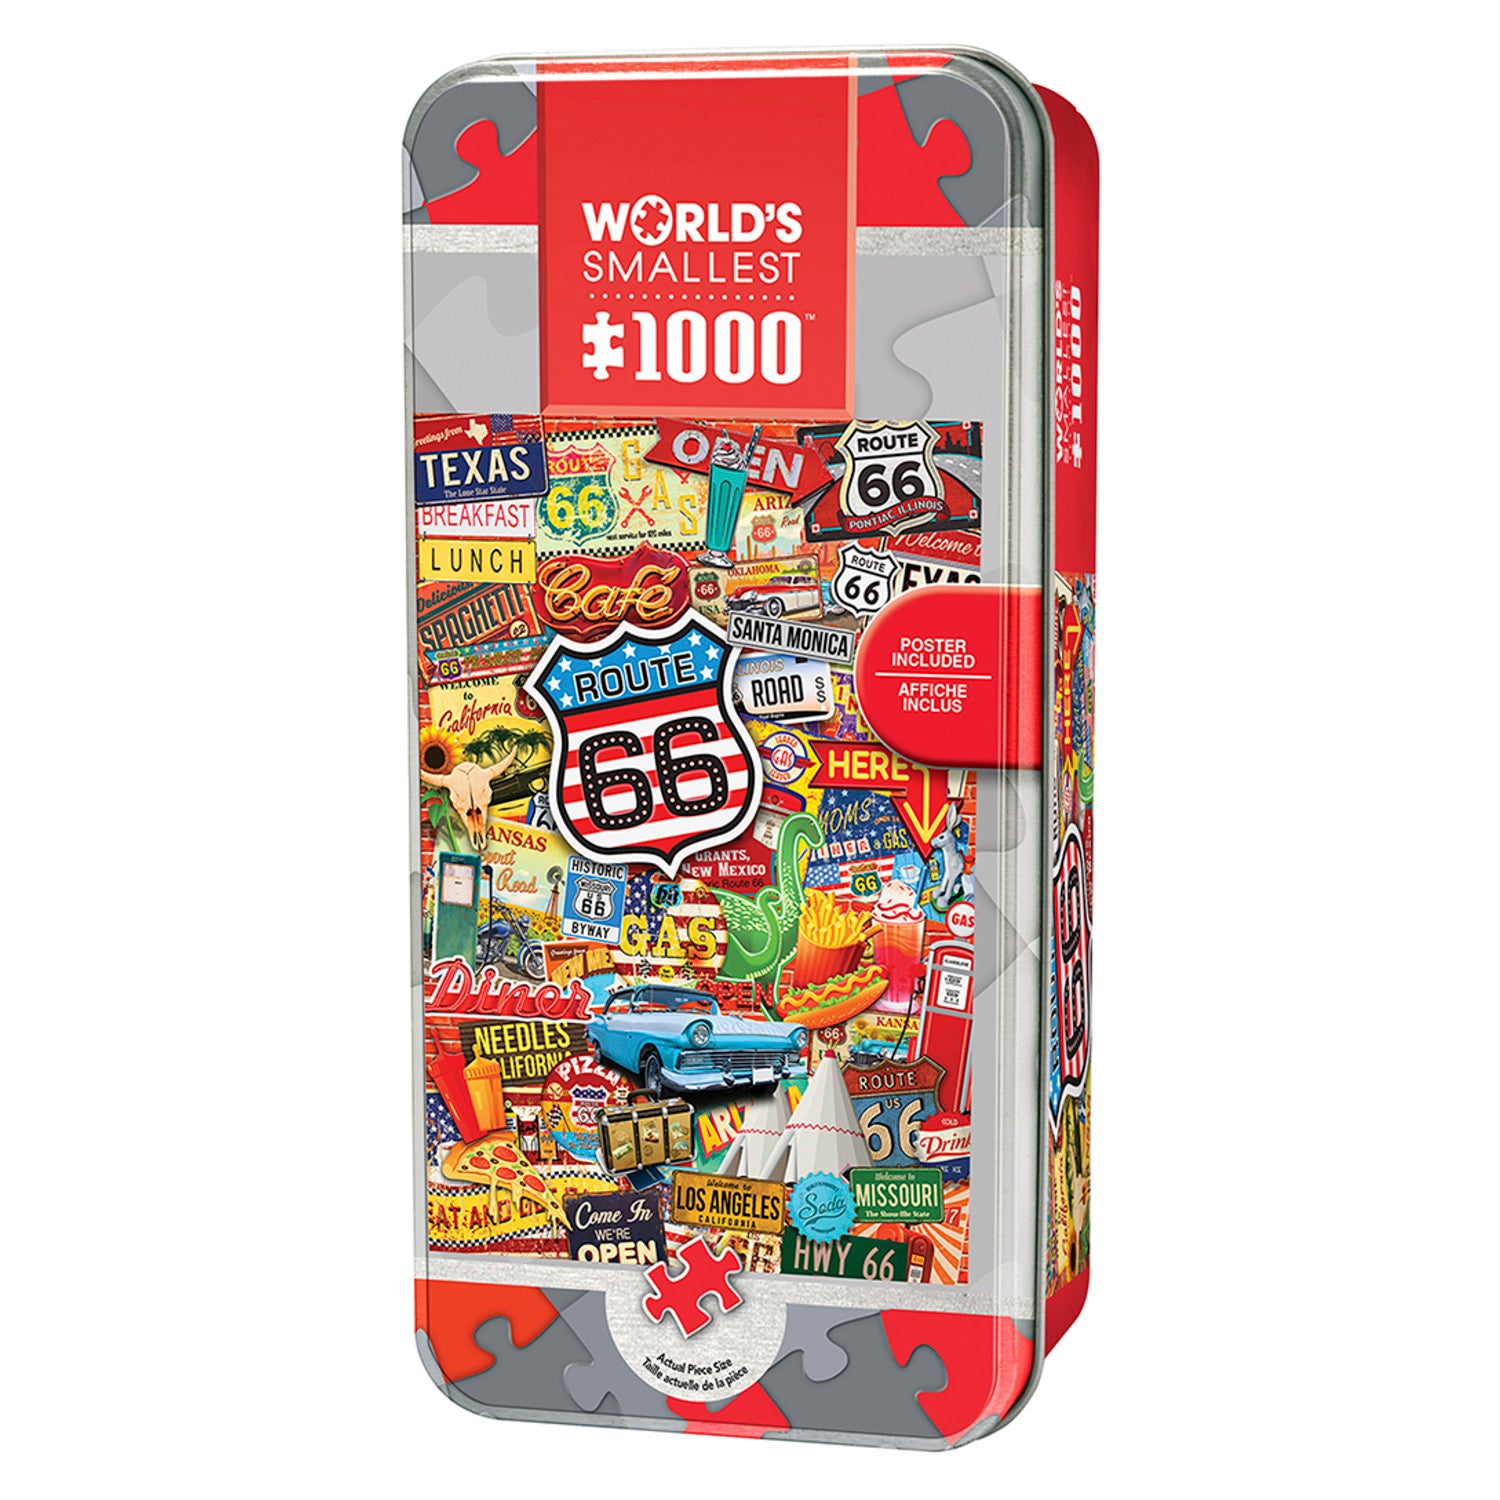 World's Smallest - Route 66 1000 Piece Jigsaw Puzzle